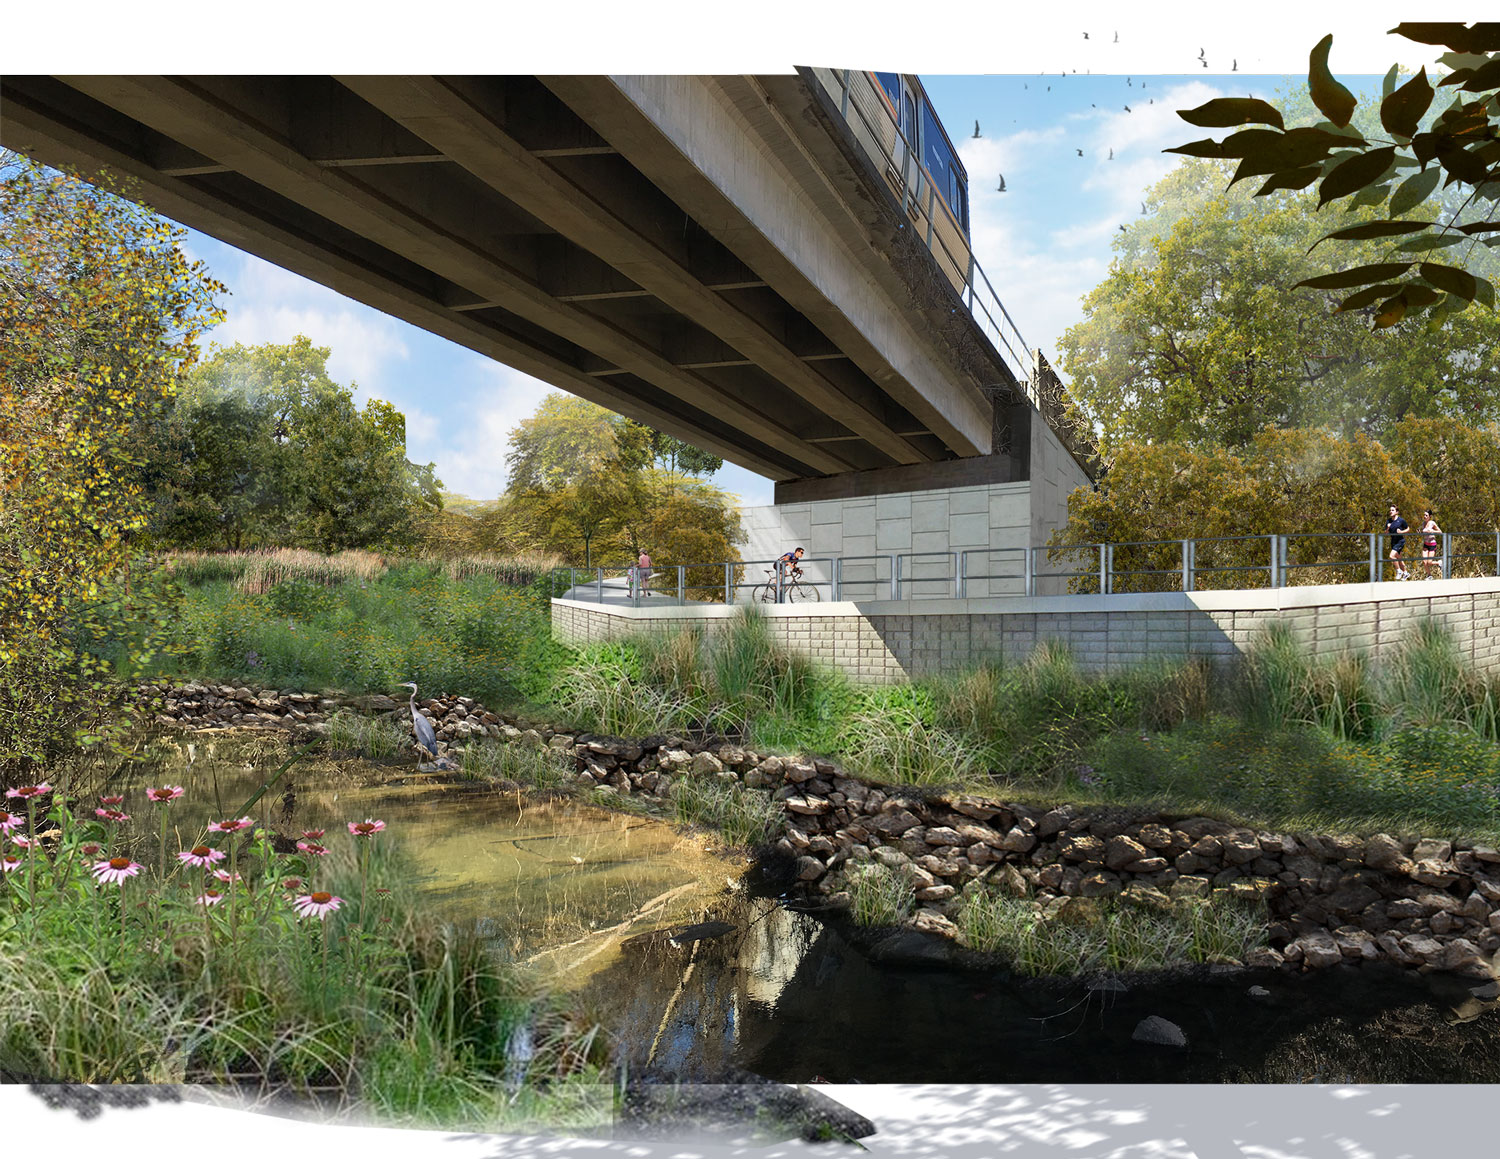  Proposed retaining structure to allow trail to pass seamlessly under the MARTA bridge&nbsp; 